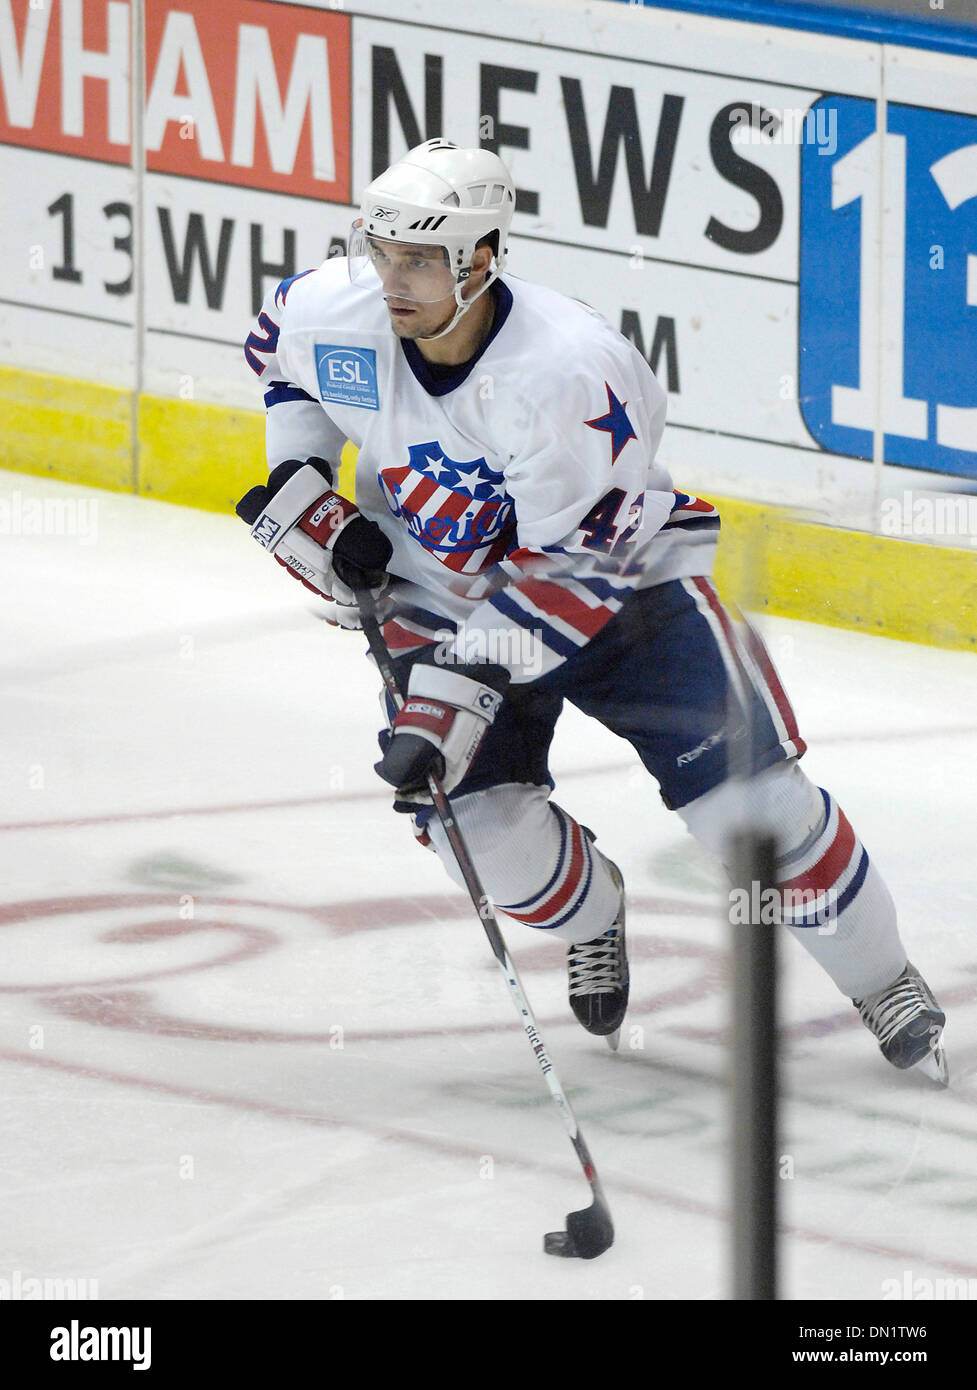 November 17, 2006: AHL - Rochester defenseman Andrej Sekera #42 in action against Manitoba. The Manitoba Canucks at Rochester Americans at the Blue Cross Arena at the War Memorial Auditorium. Rochester defeated Manitoba 4 to 3 in OT.(Credit Image: © Alan Schwartz/Cal Sport Media) Stock Photo